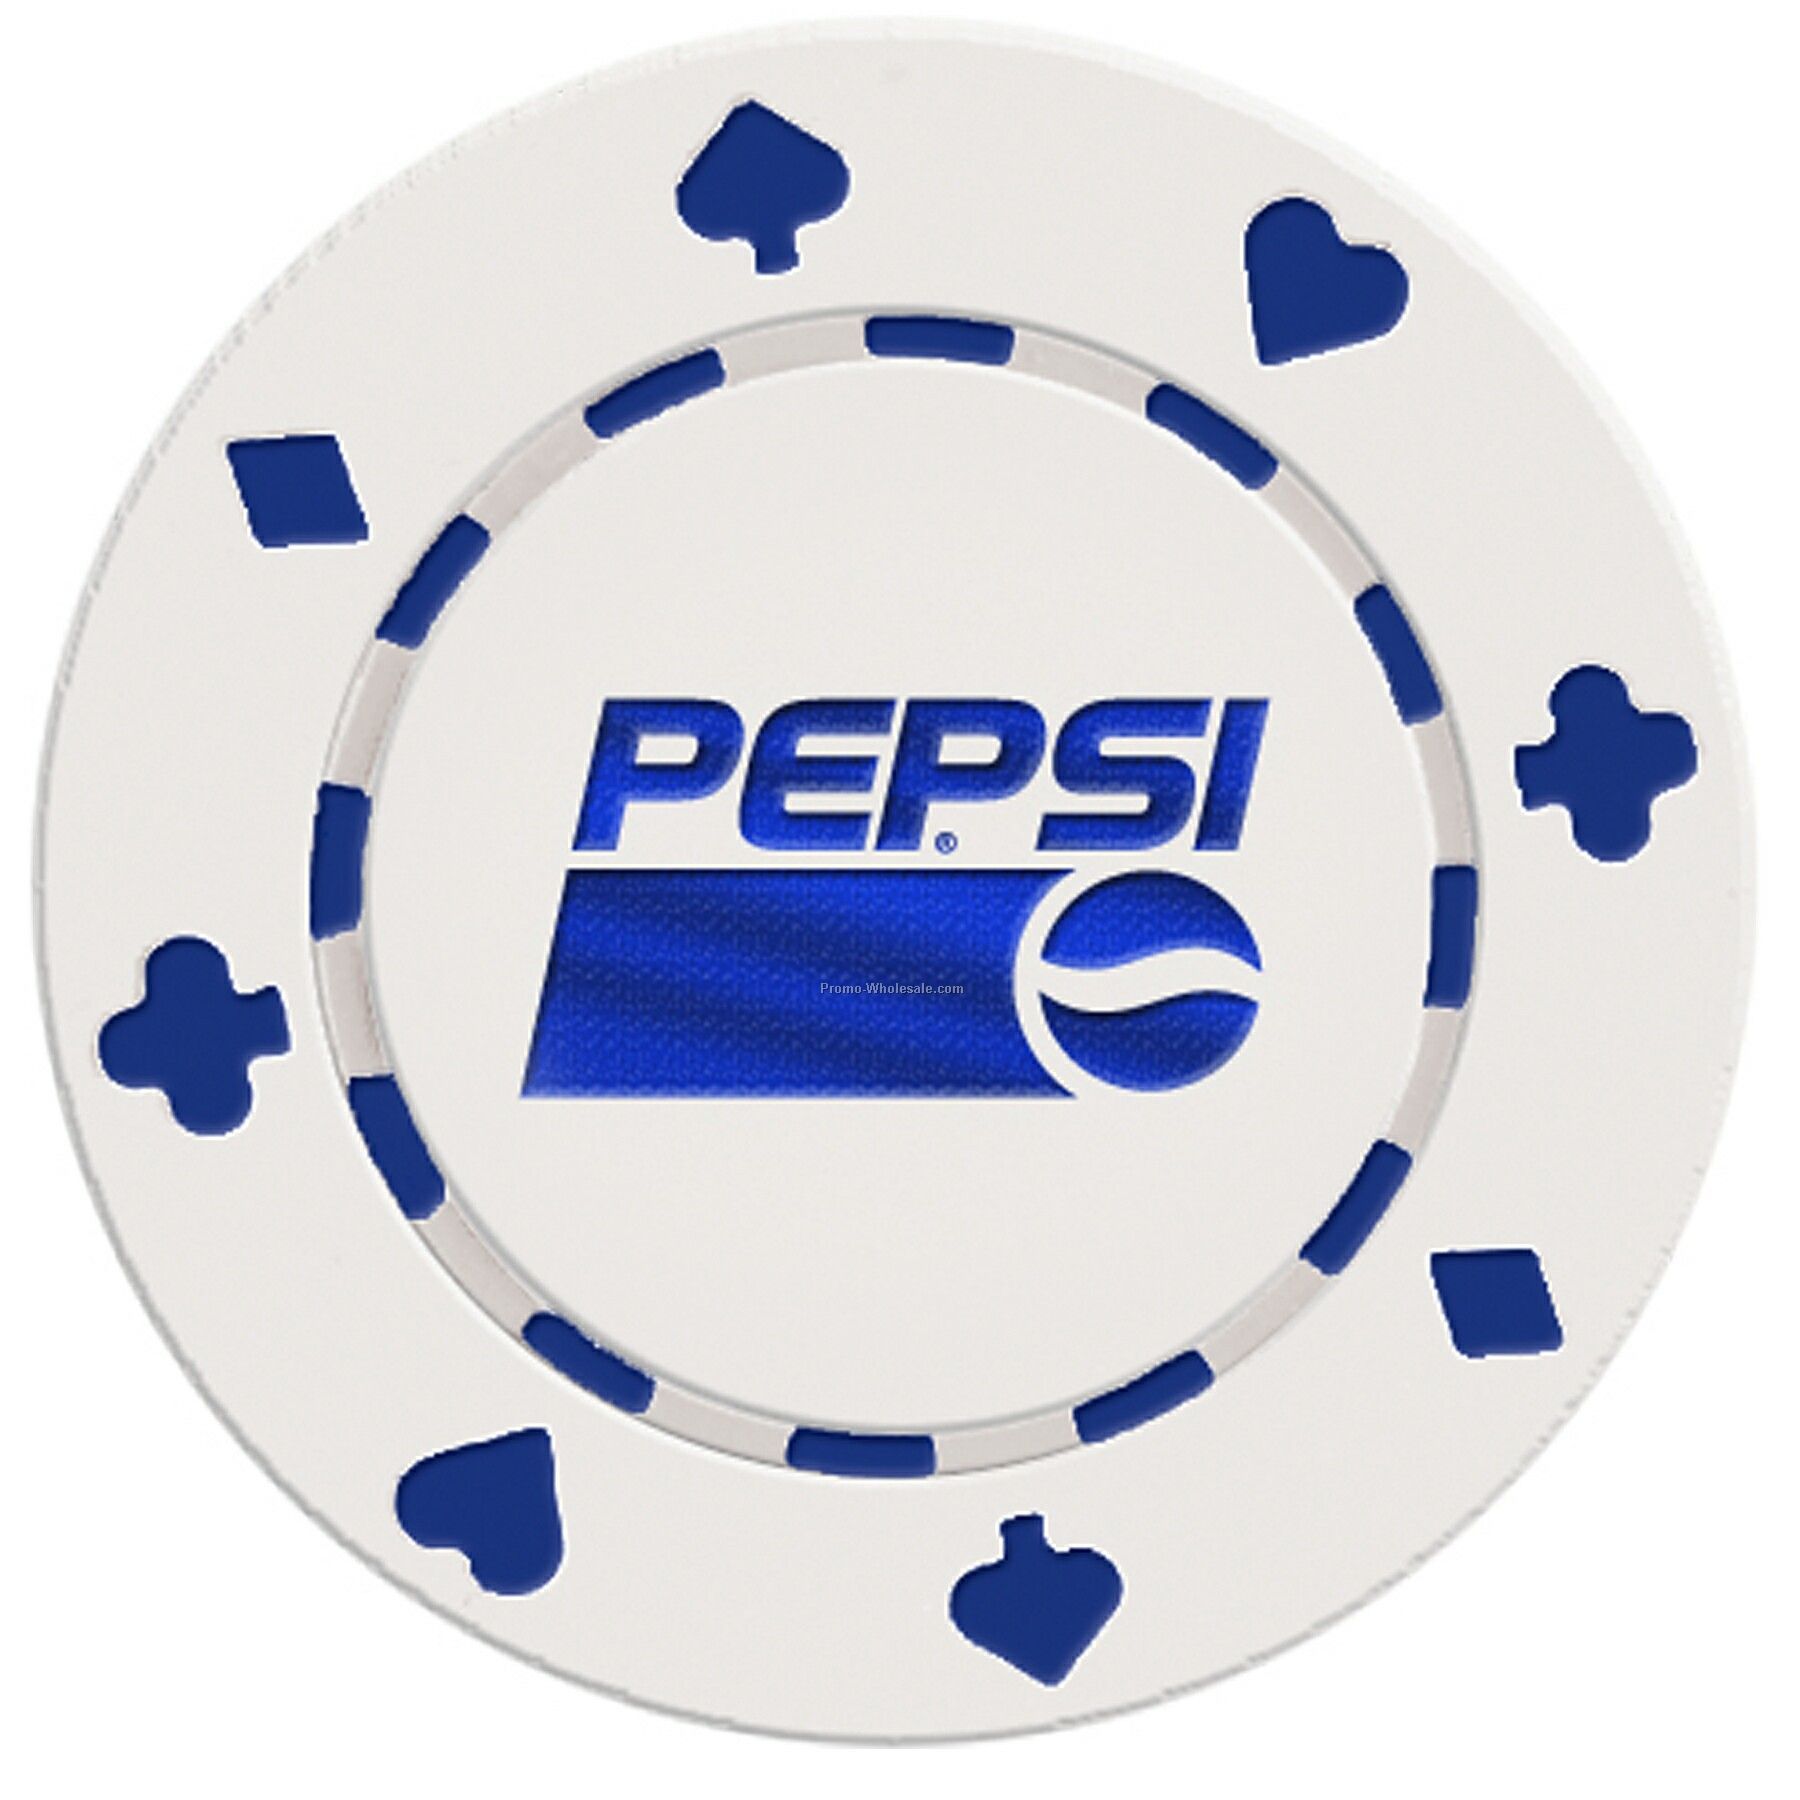 Suited Style Poker Chip Business Card - Blank